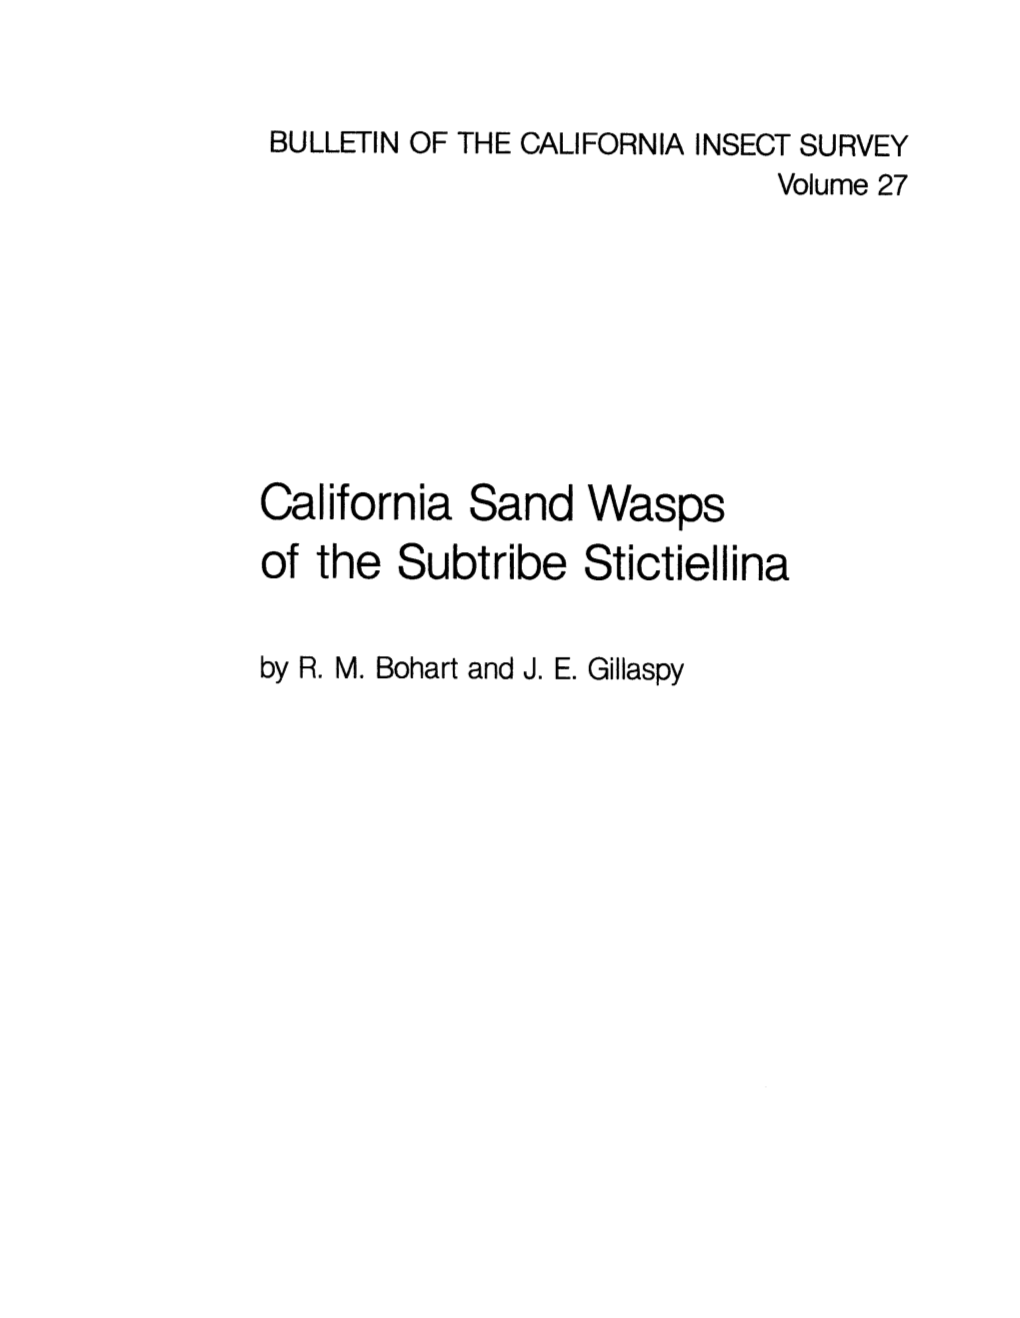 California Sand Wasps of the Subtribe Stictiellina by R